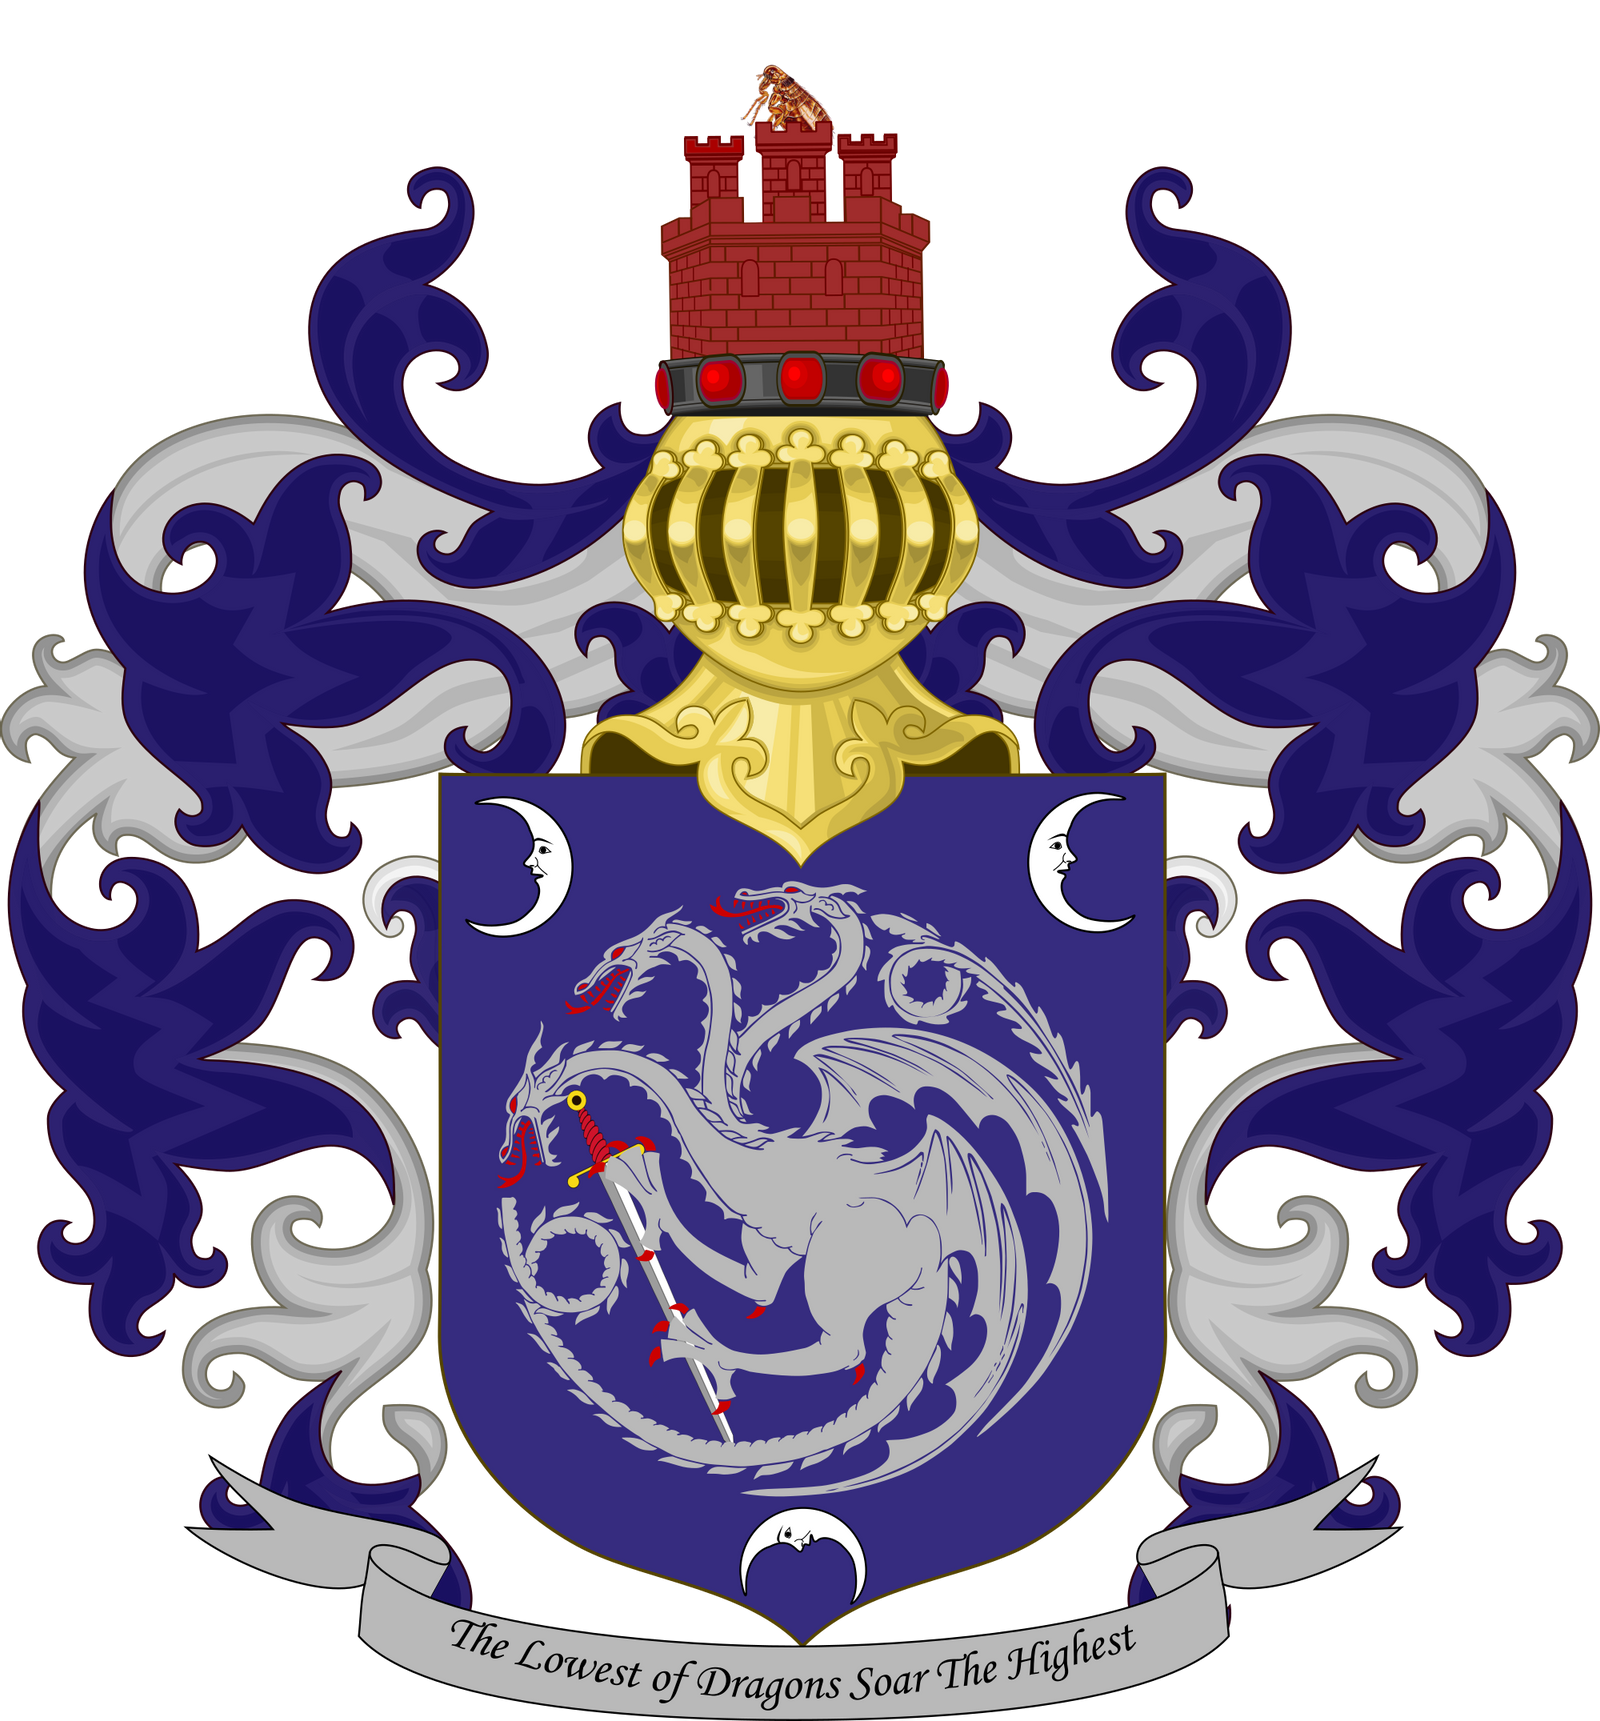 ck2 house coat of arms mod